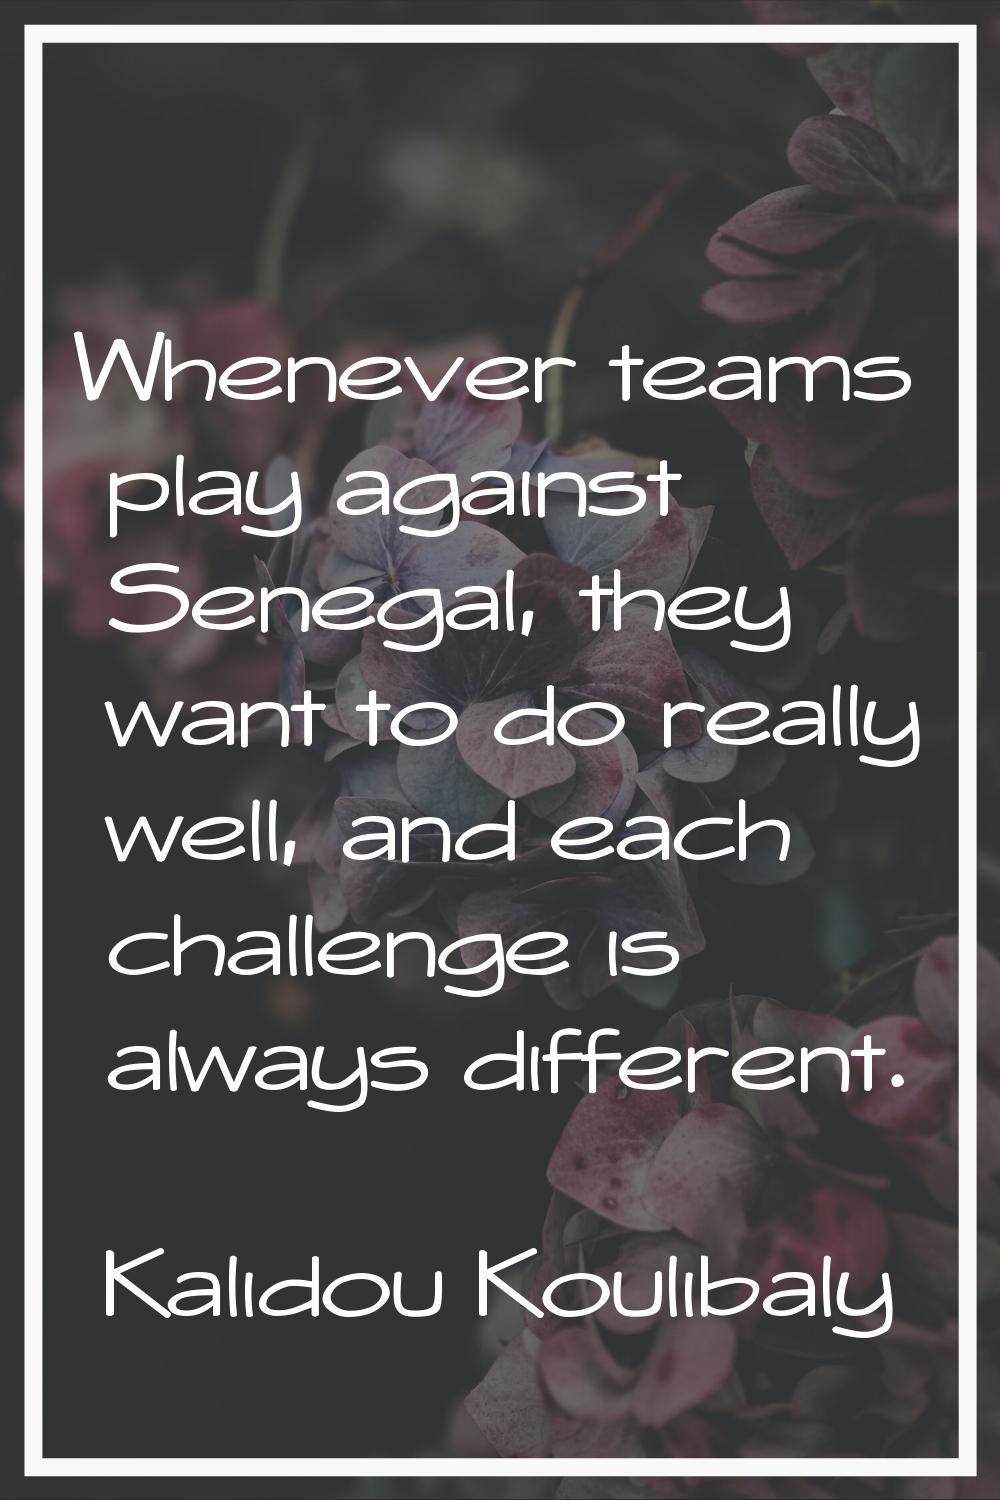 Whenever teams play against Senegal, they want to do really well, and each challenge is always diff